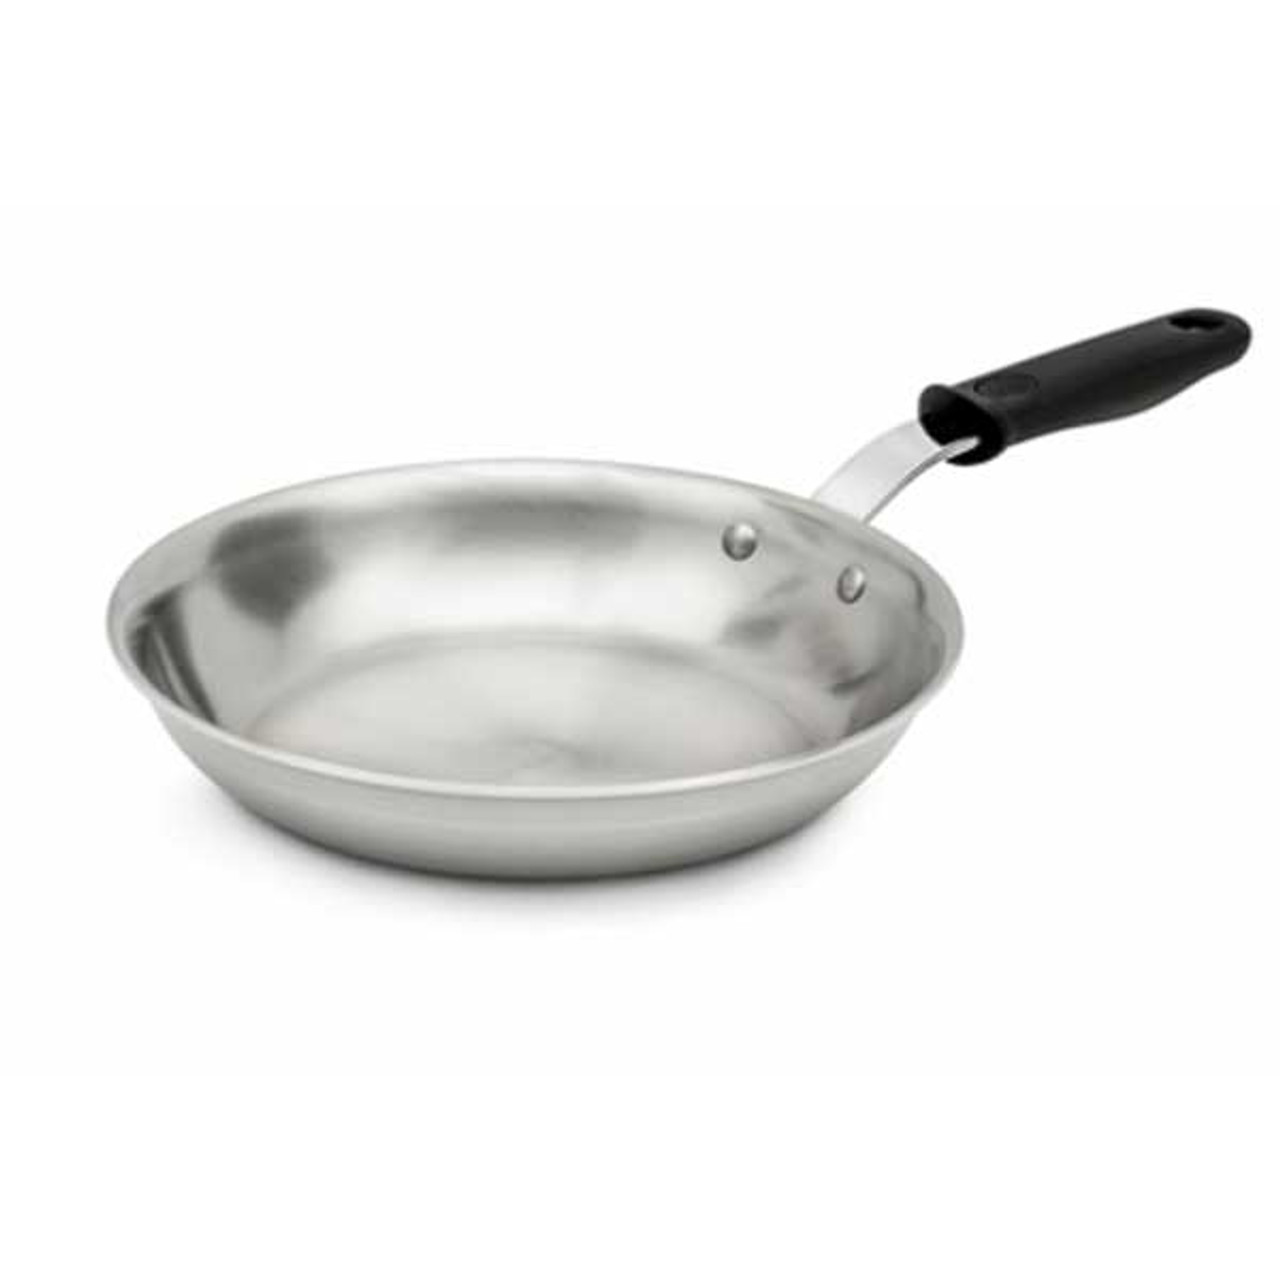 https://cdn11.bigcommerce.com/s-g3i86bef61/images/stencil/1280x1280/products/1685/4745/Vollrath-692110-Fry-Pan-10__49472.1682433914.jpg?c=1